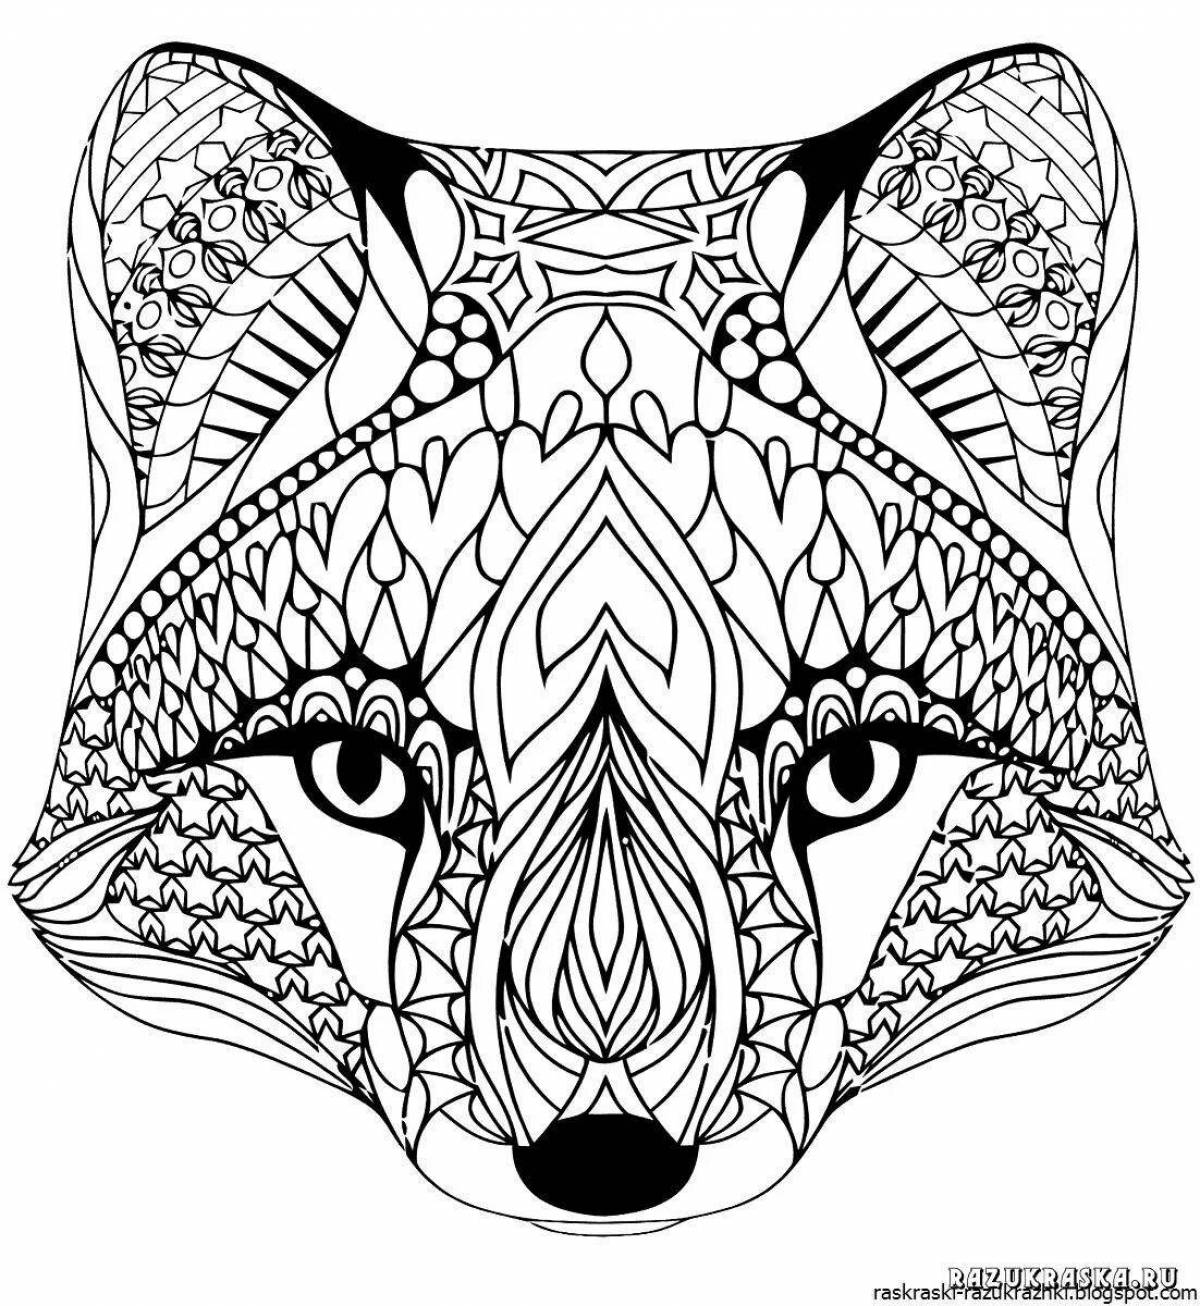 Adorable animal coloring pages for adults